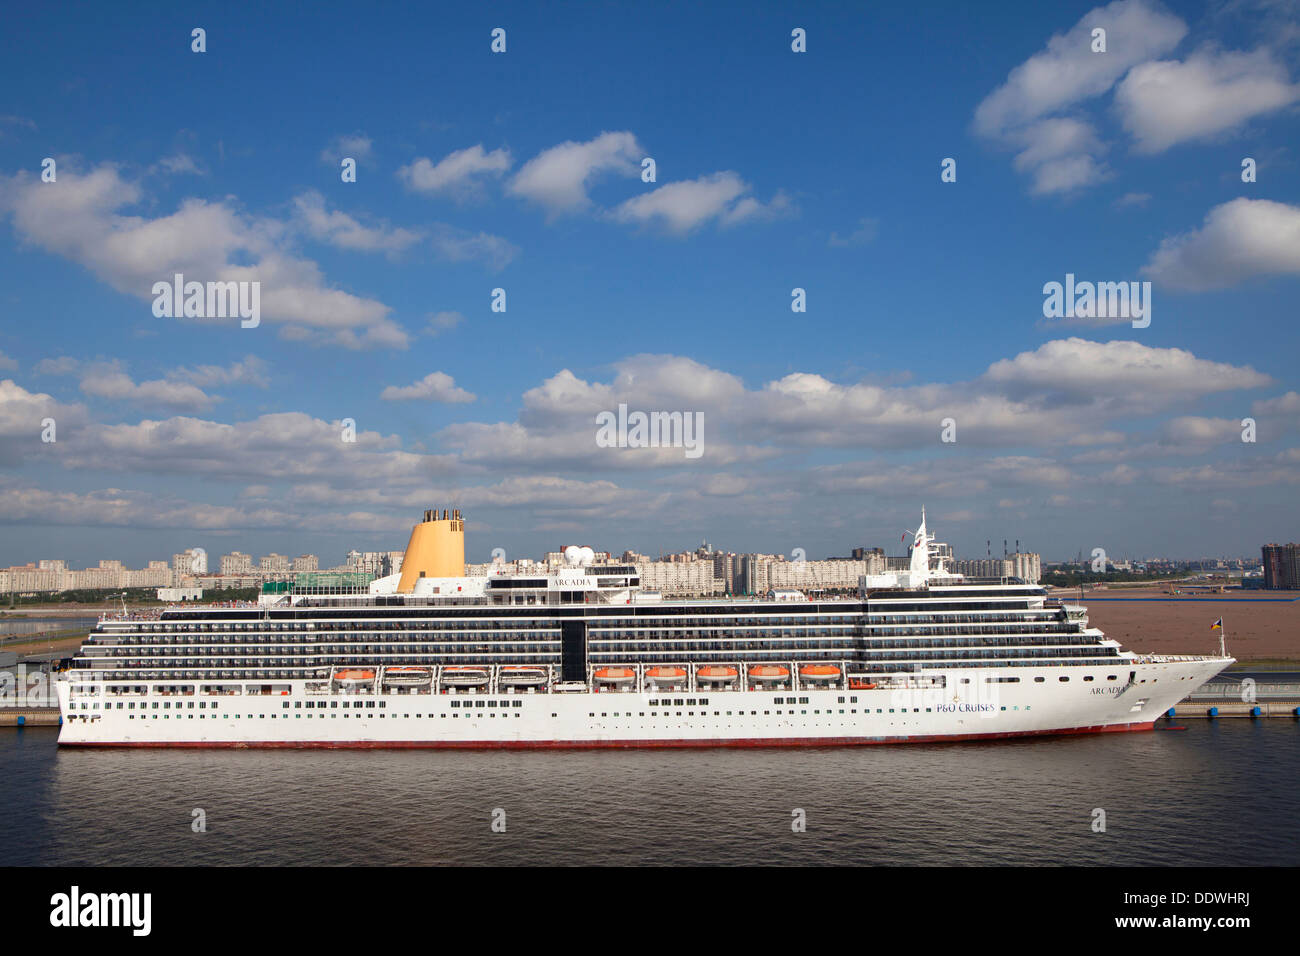 MS Arcadia cruise ship in the P&O Cruises fleet docked in St Petersburg Russia Stock Photo